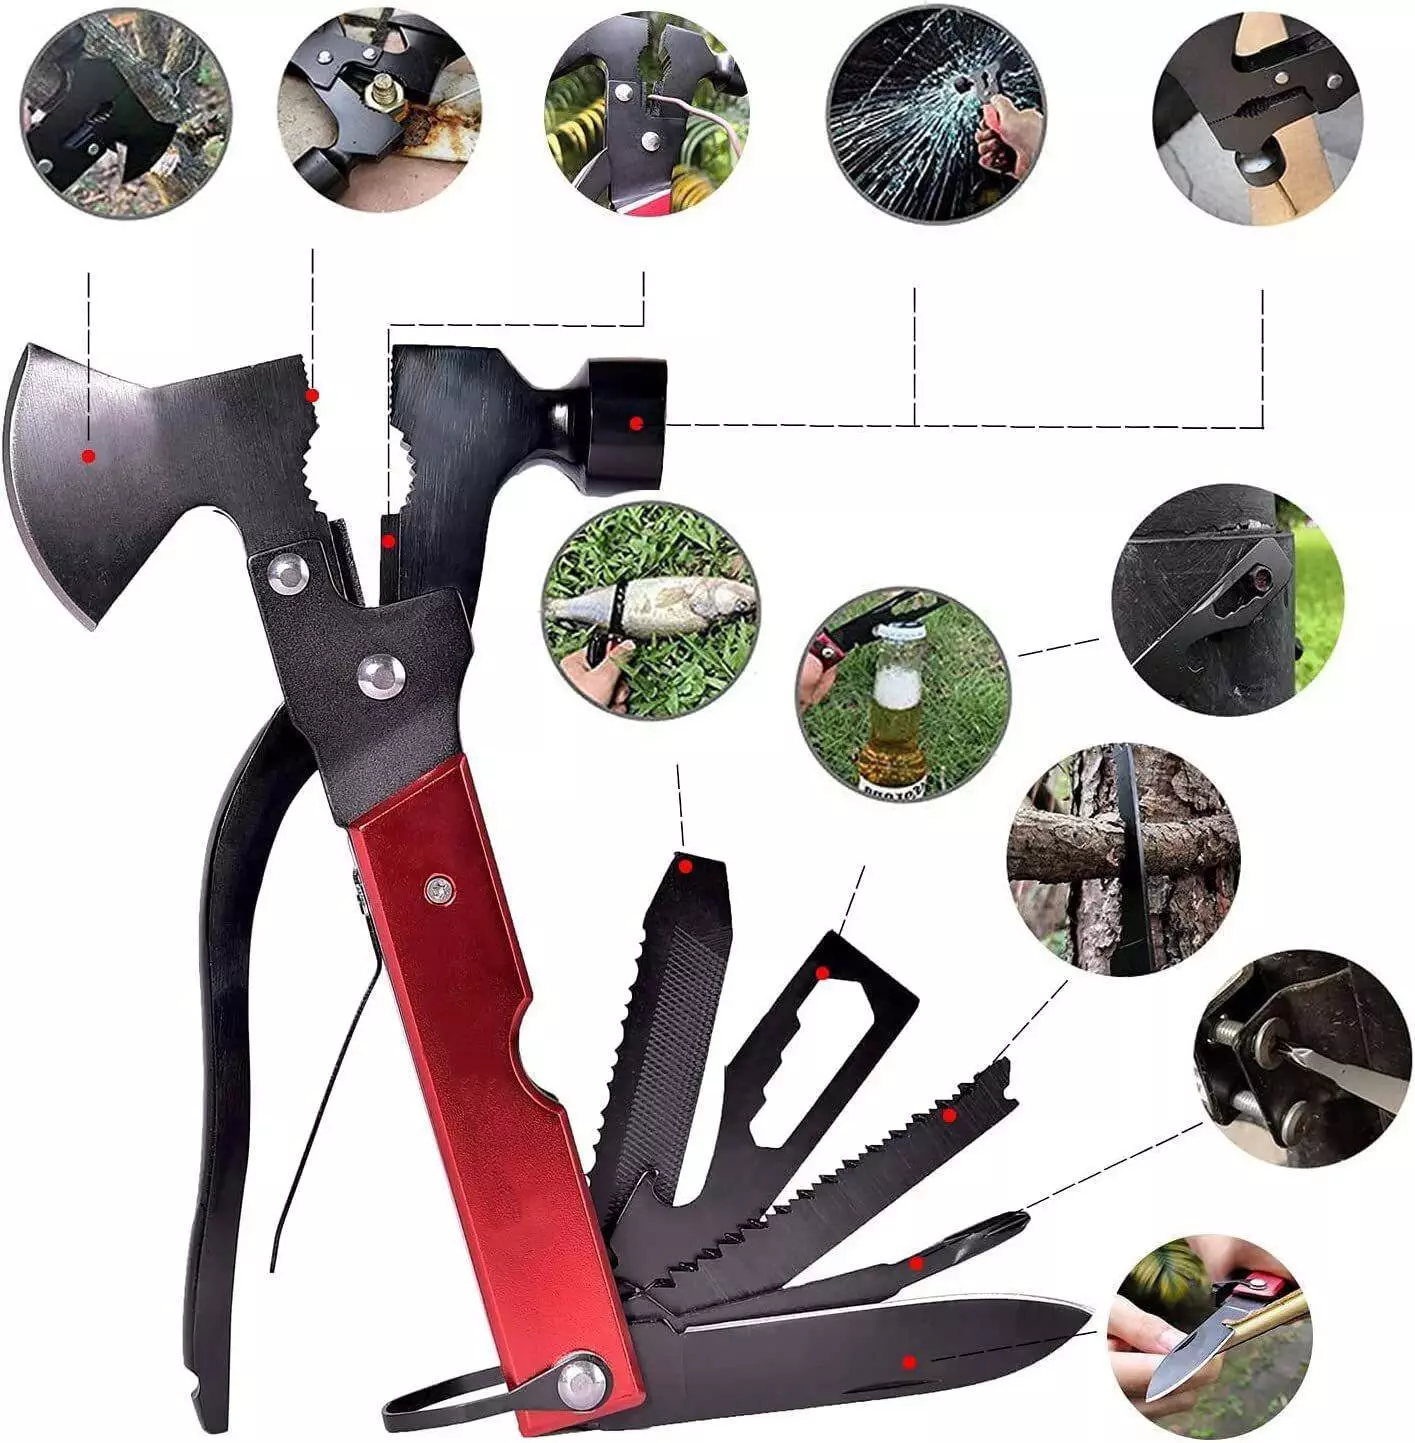 14-in-1 Multifunctional Axe Survival Gear Kit for Outdoor Camping, Hiking,  and Emergency Situations